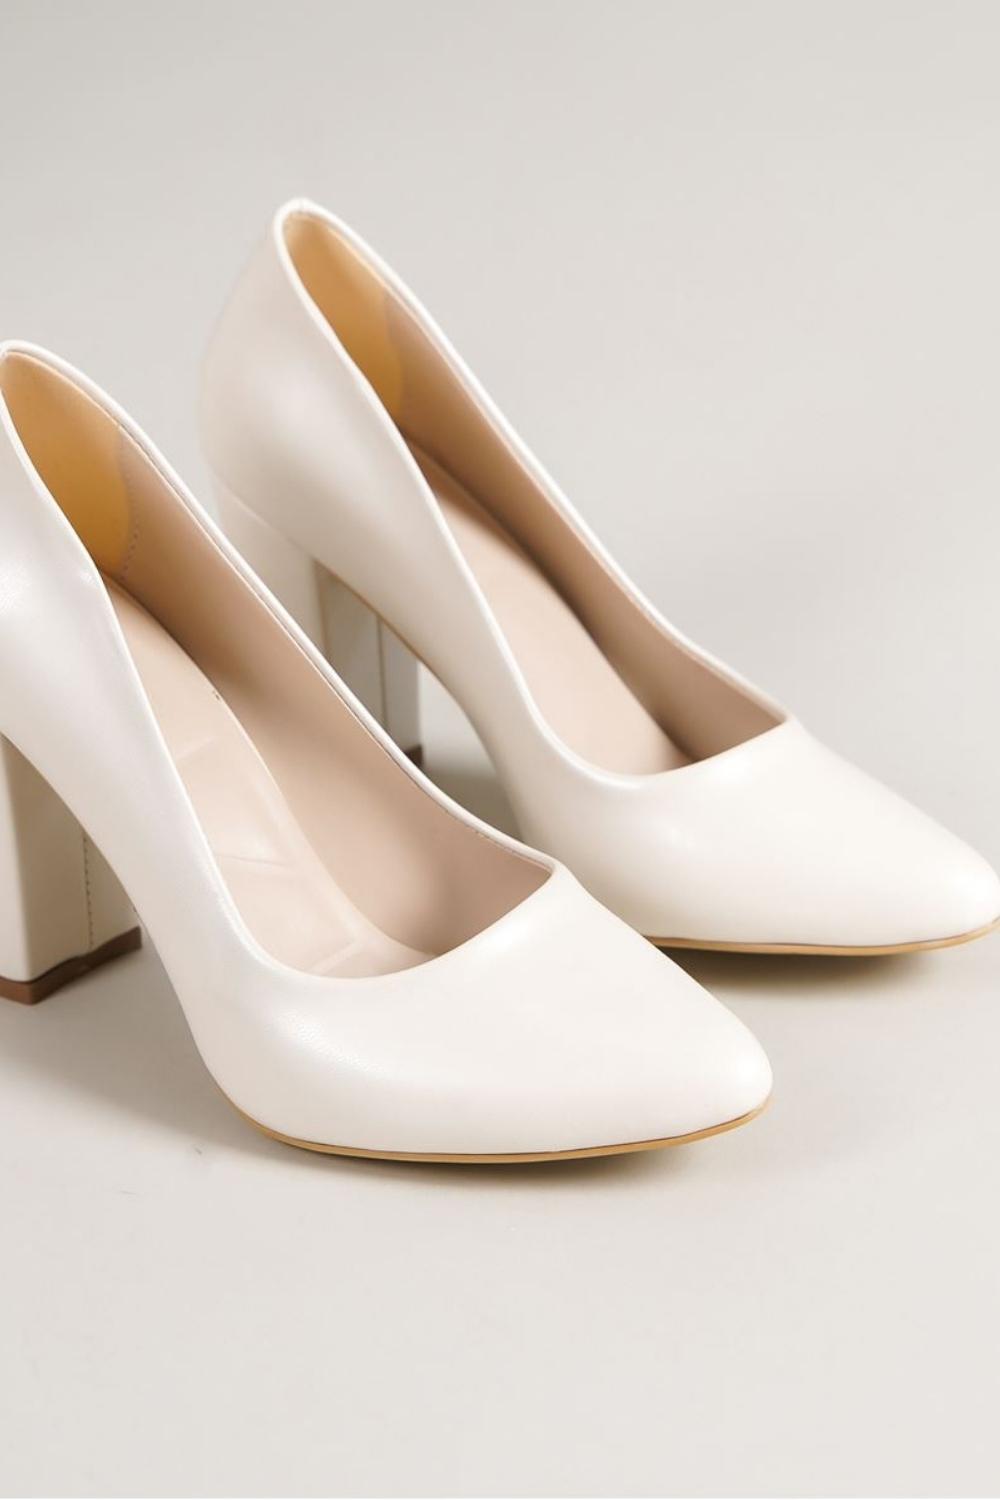 Marry White Pearl Detailed Heeled Women's Shoes - STREETMODE™